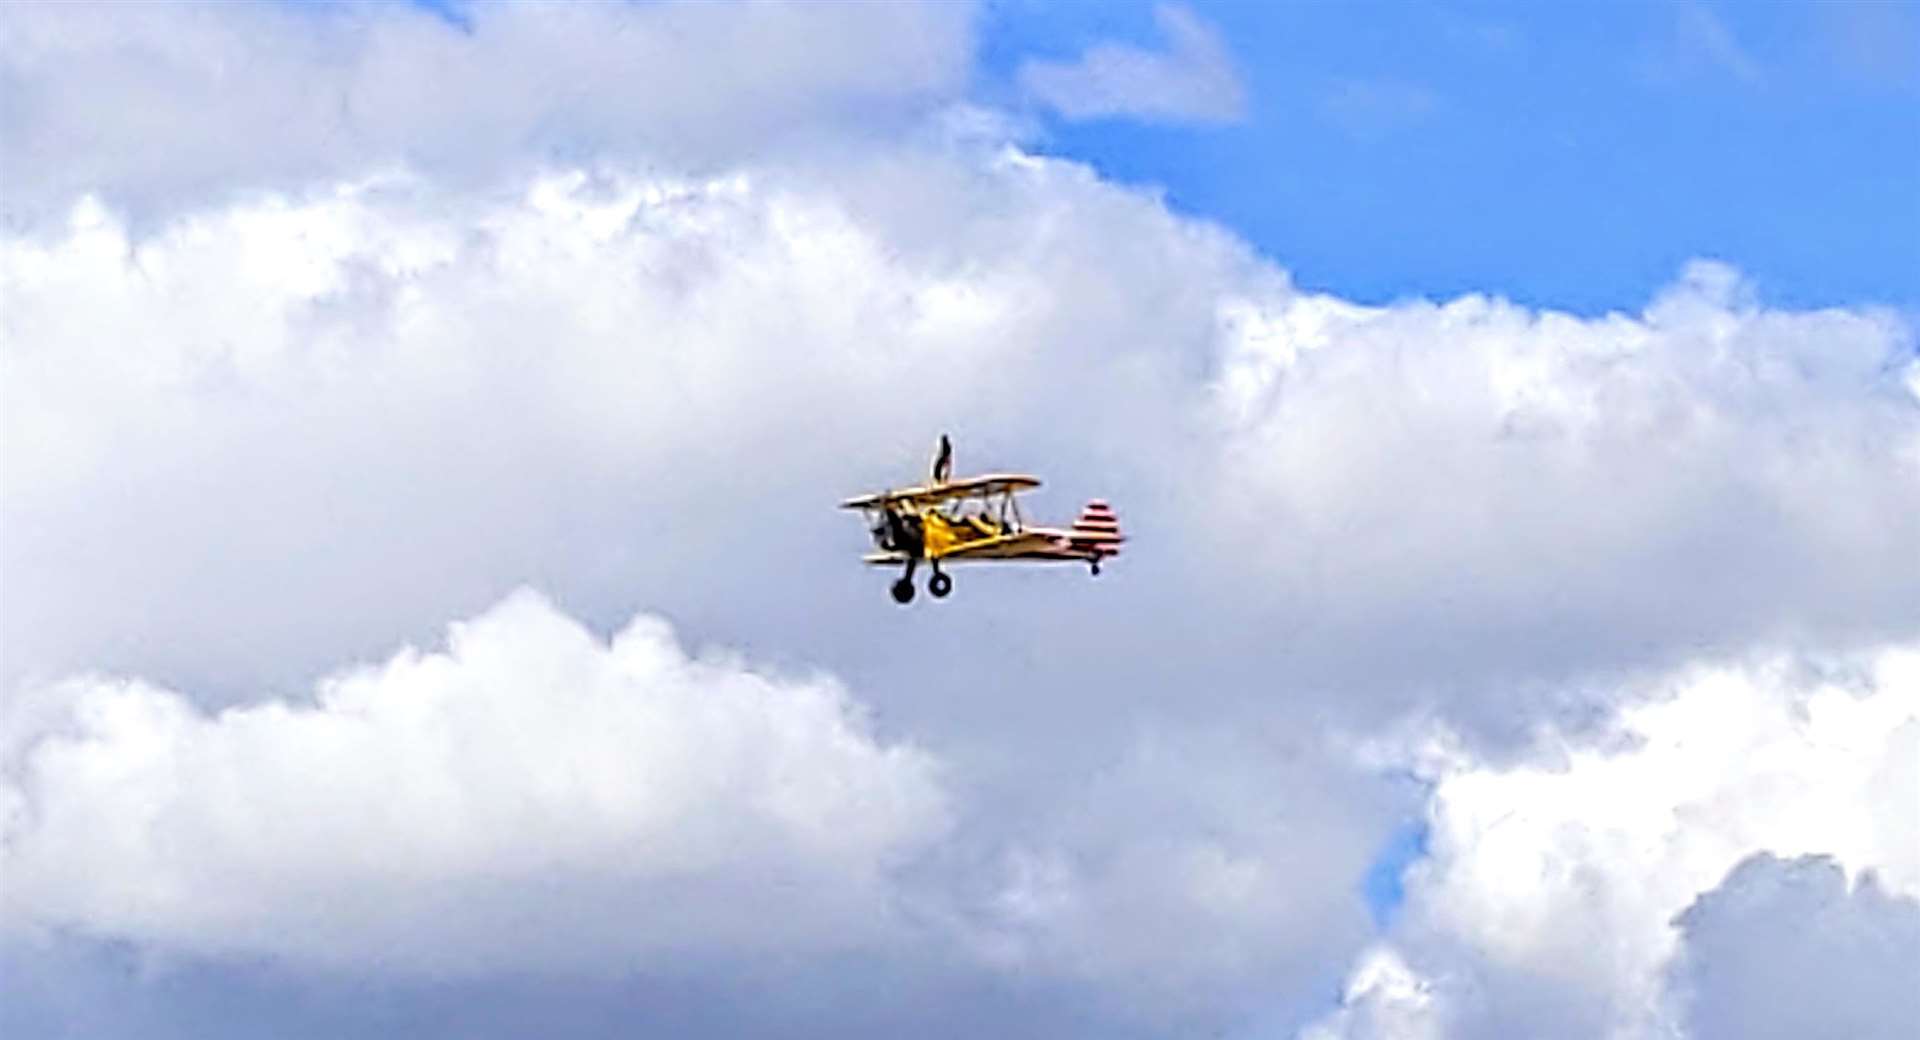 Reaching heights of 500ft, Nicky Clifford on top the Boeing Stearman biplane